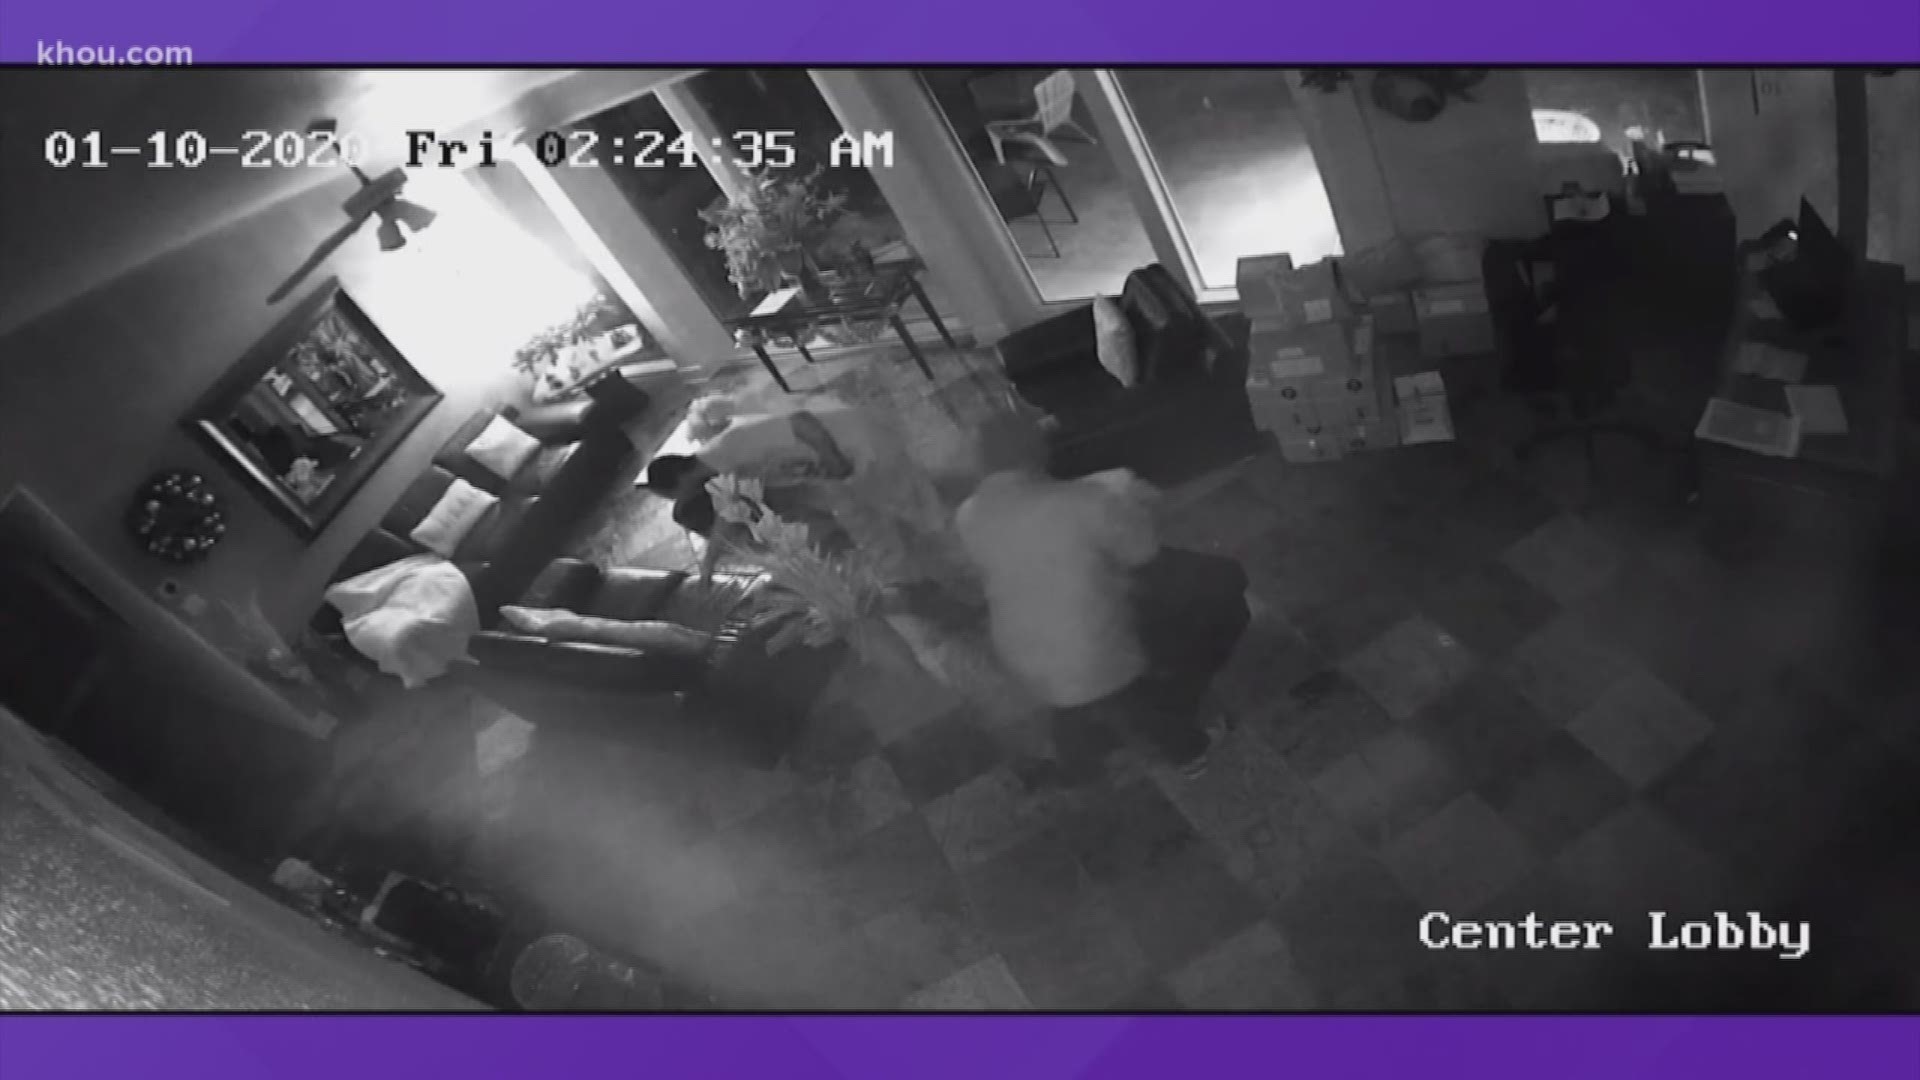 The Harris County Fire Marshal’s Office is hoping someone can identify two people who broke into the leasing office of an apartment complex and set it on fire.